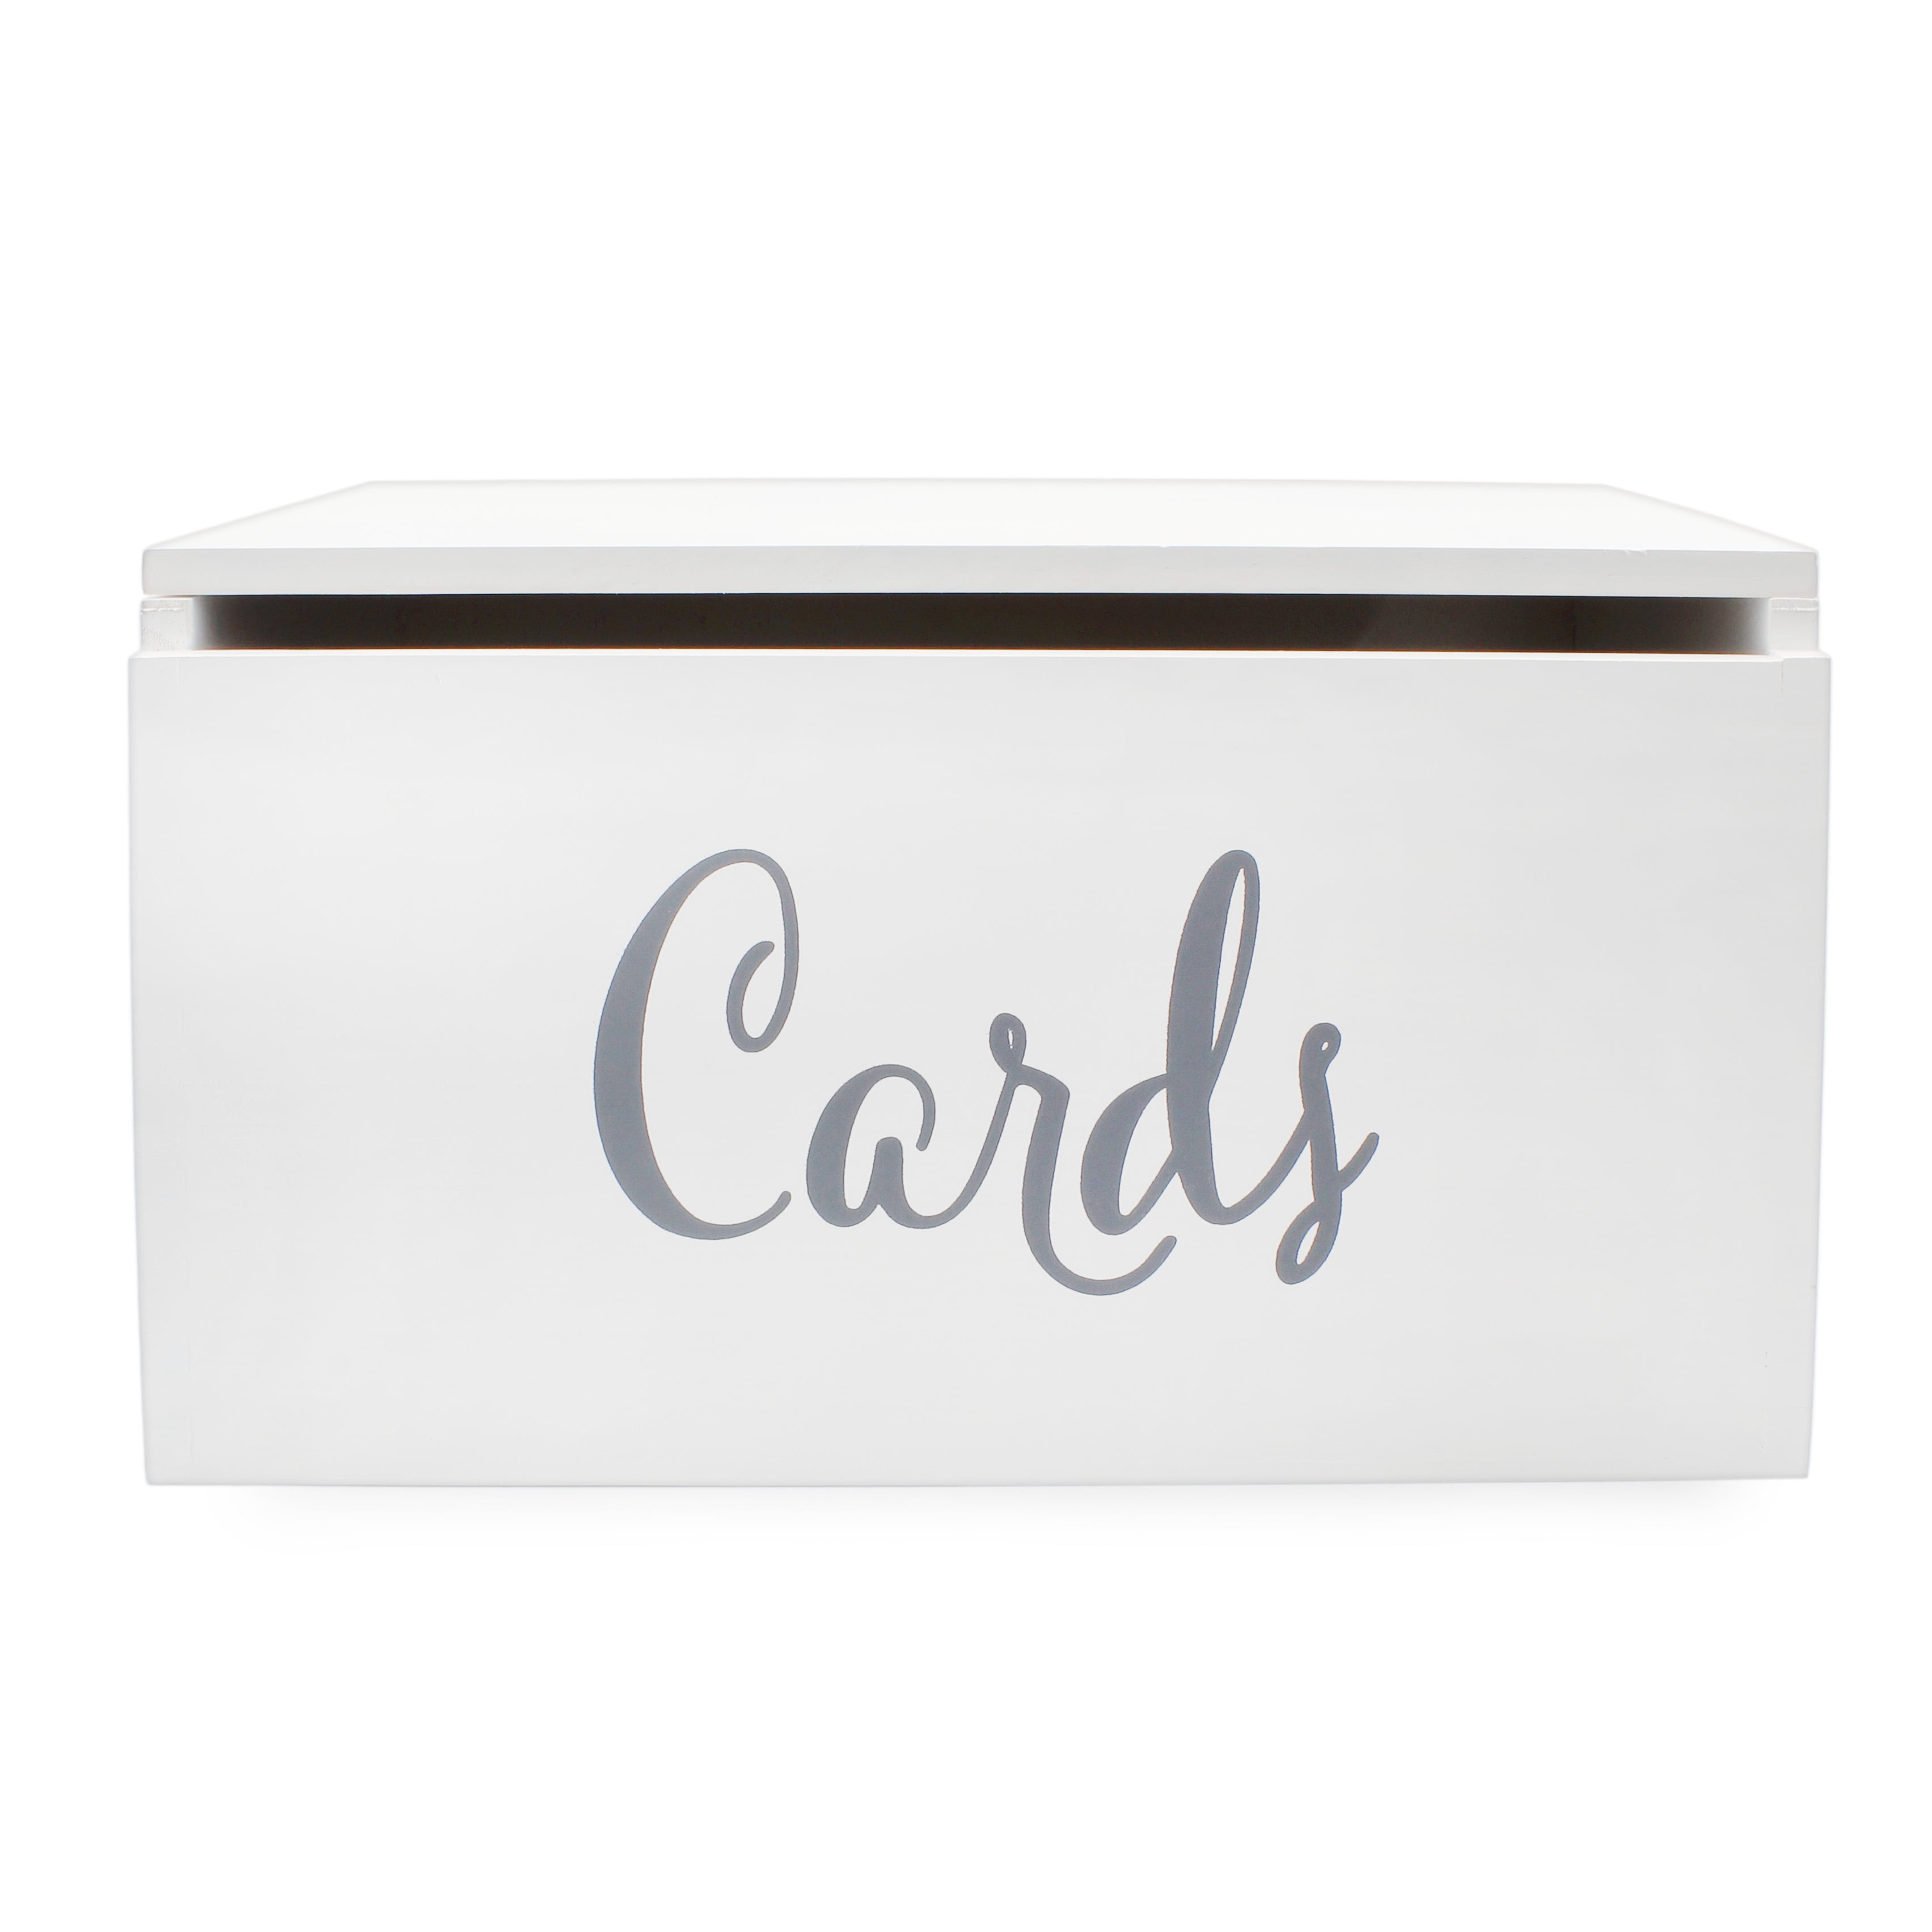 Darware Wooden Wedding Card Box for Reception, White Decorative Card  Receiving Box for Birthdays, Showers, Graduations and More